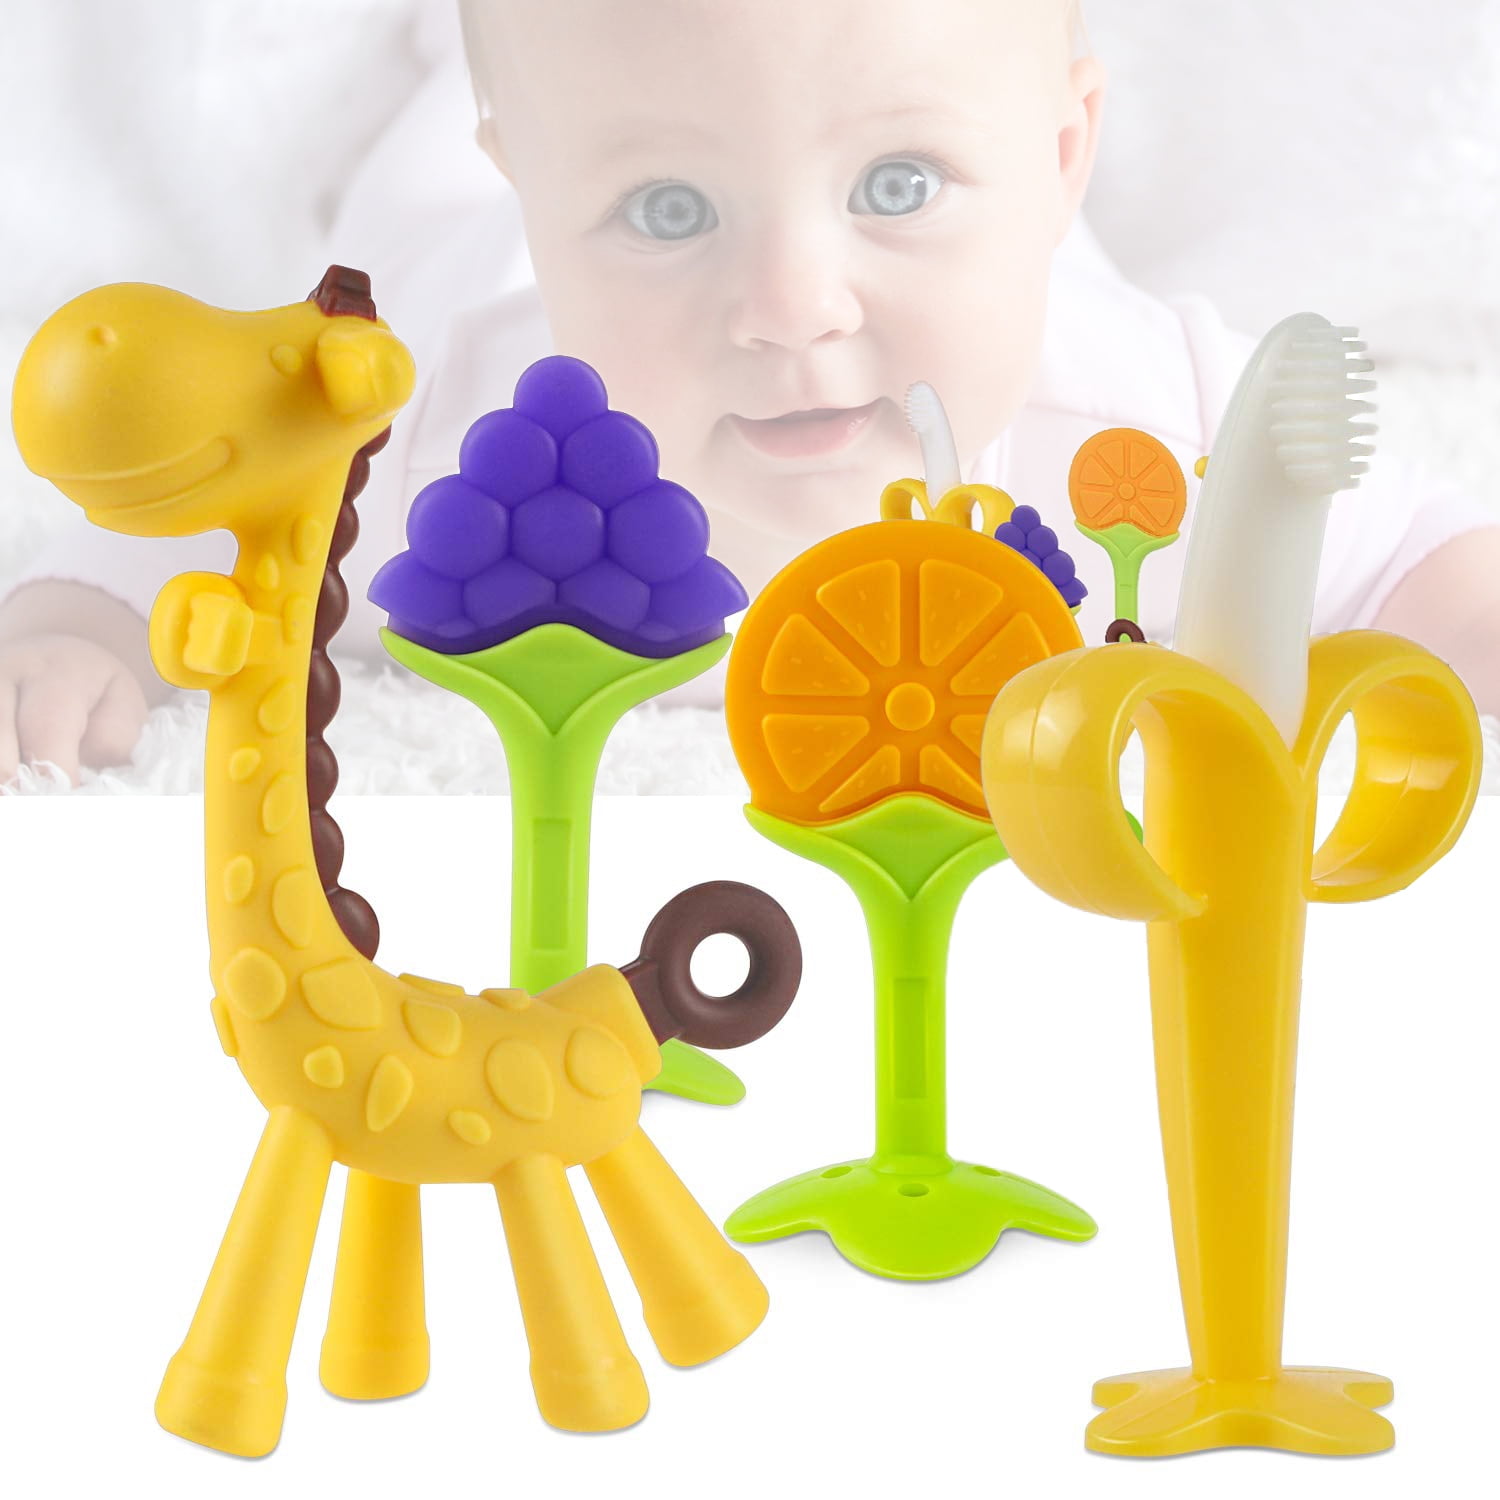 Silicone Banana Fruit Giraffe Teethers for Infant and Toddler Soothe Babies Gums 5-Pack Baby Teething Toys for Newborn Freezer Safe BPA Free 